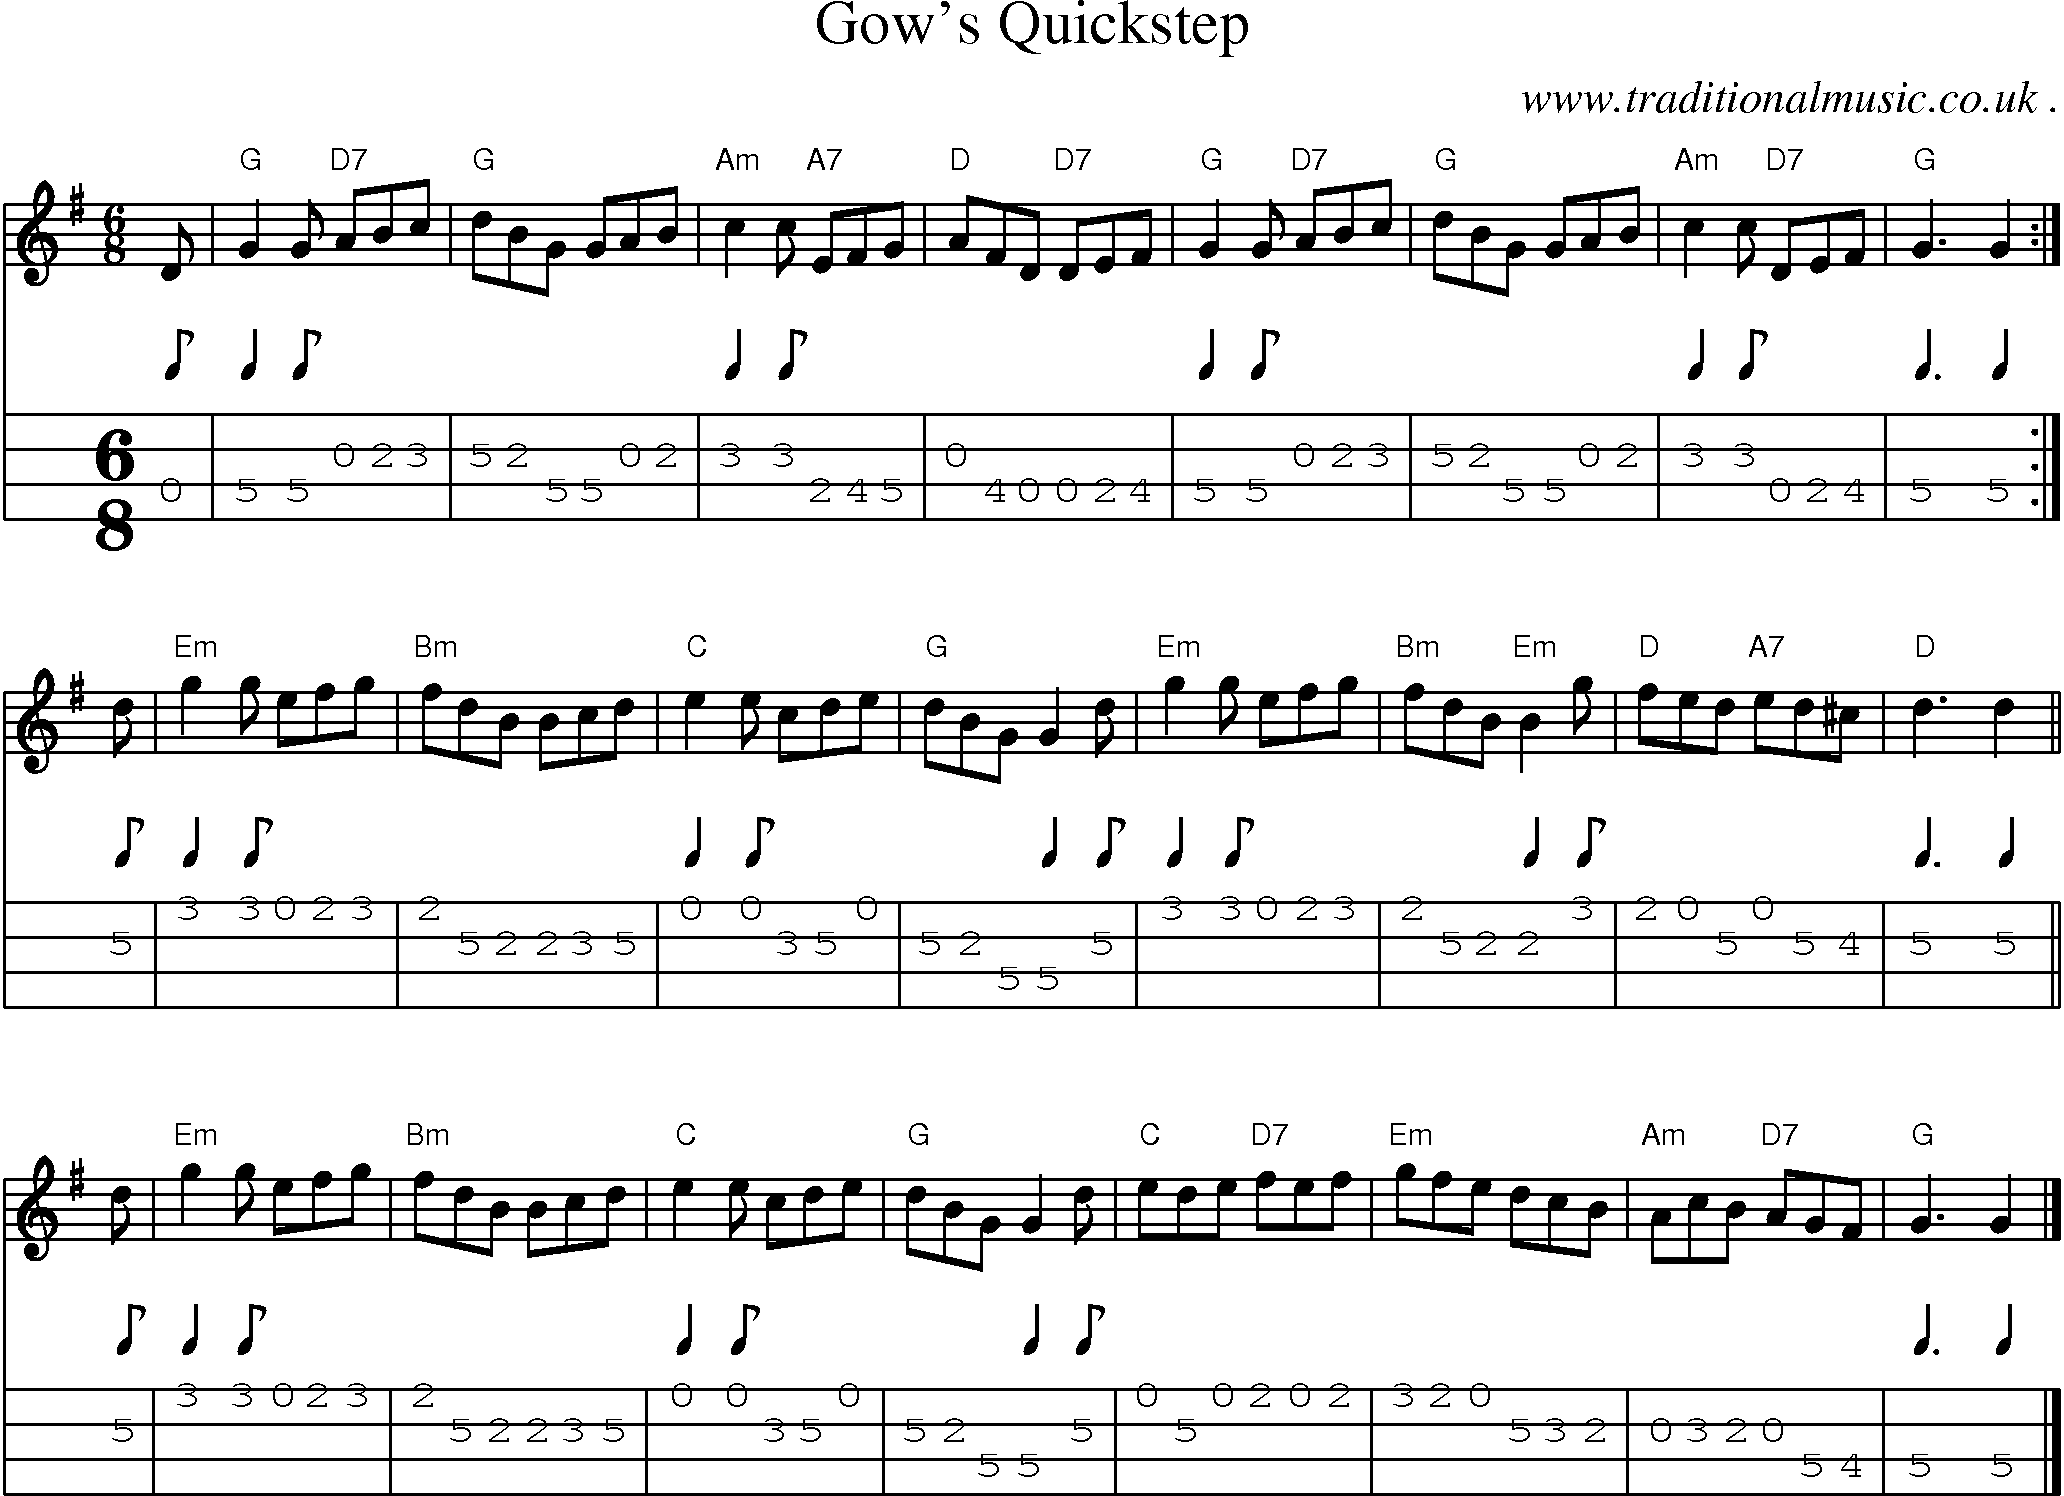 Sheet-music  score, Chords and Mandolin Tabs for Gows Quickstep